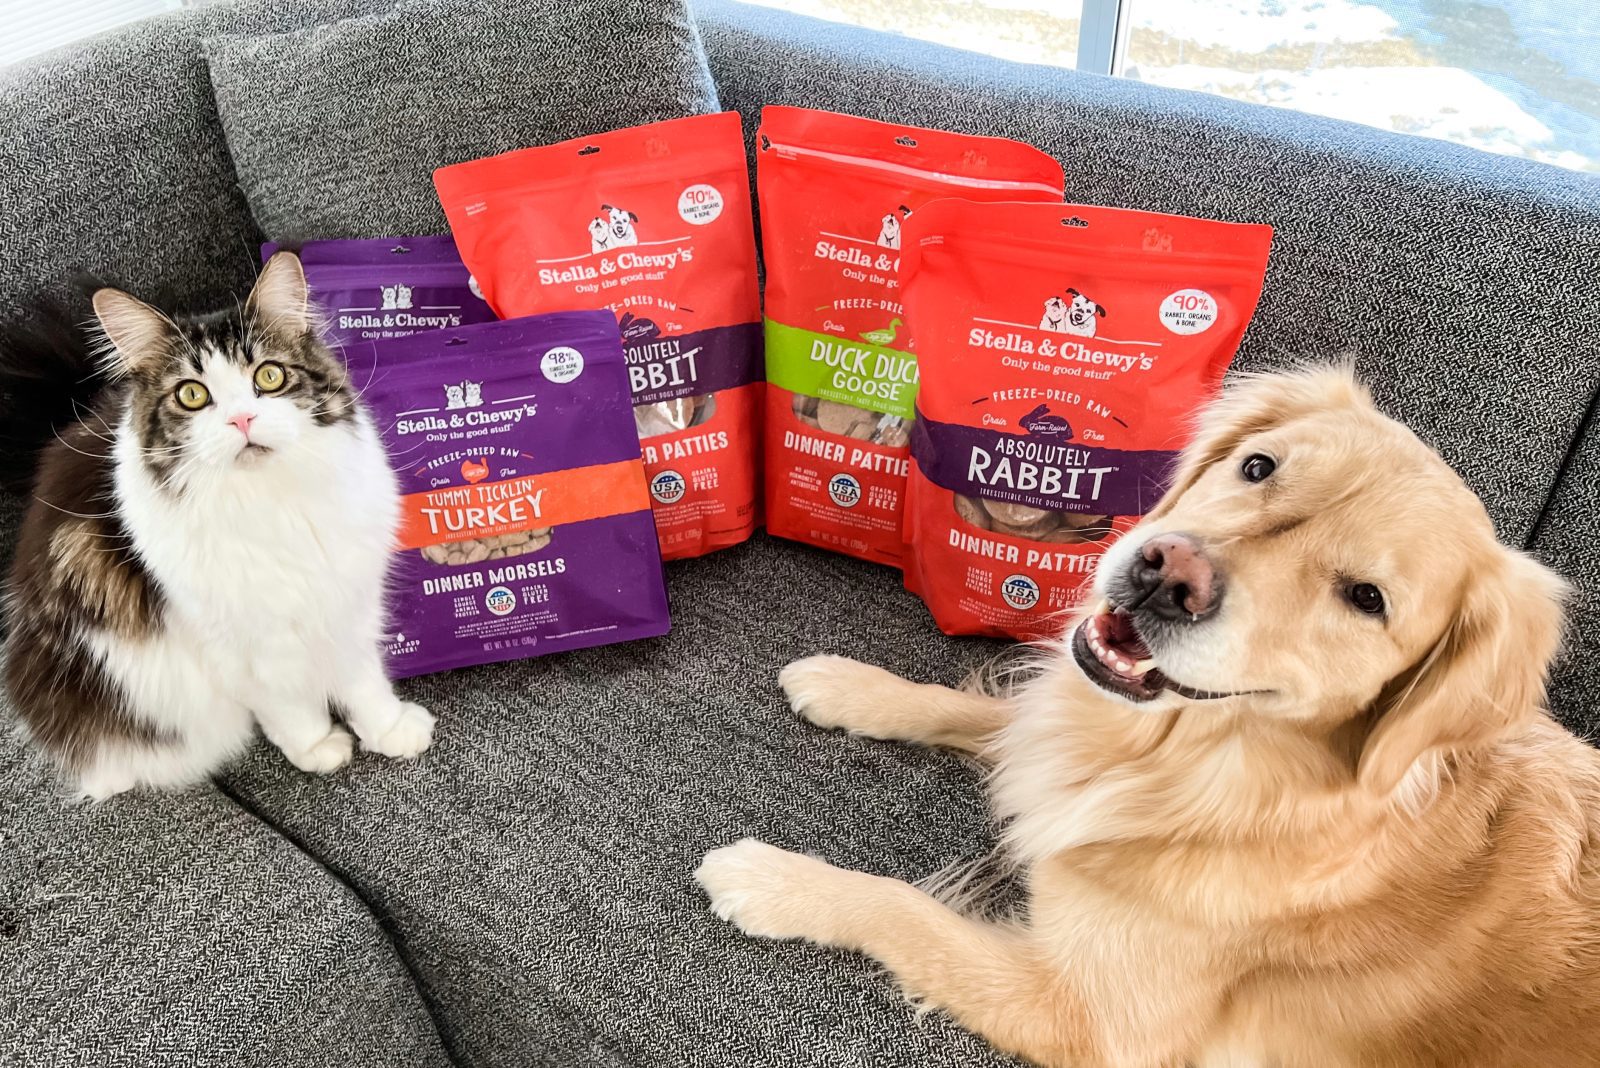 Why Raw Pet Food?